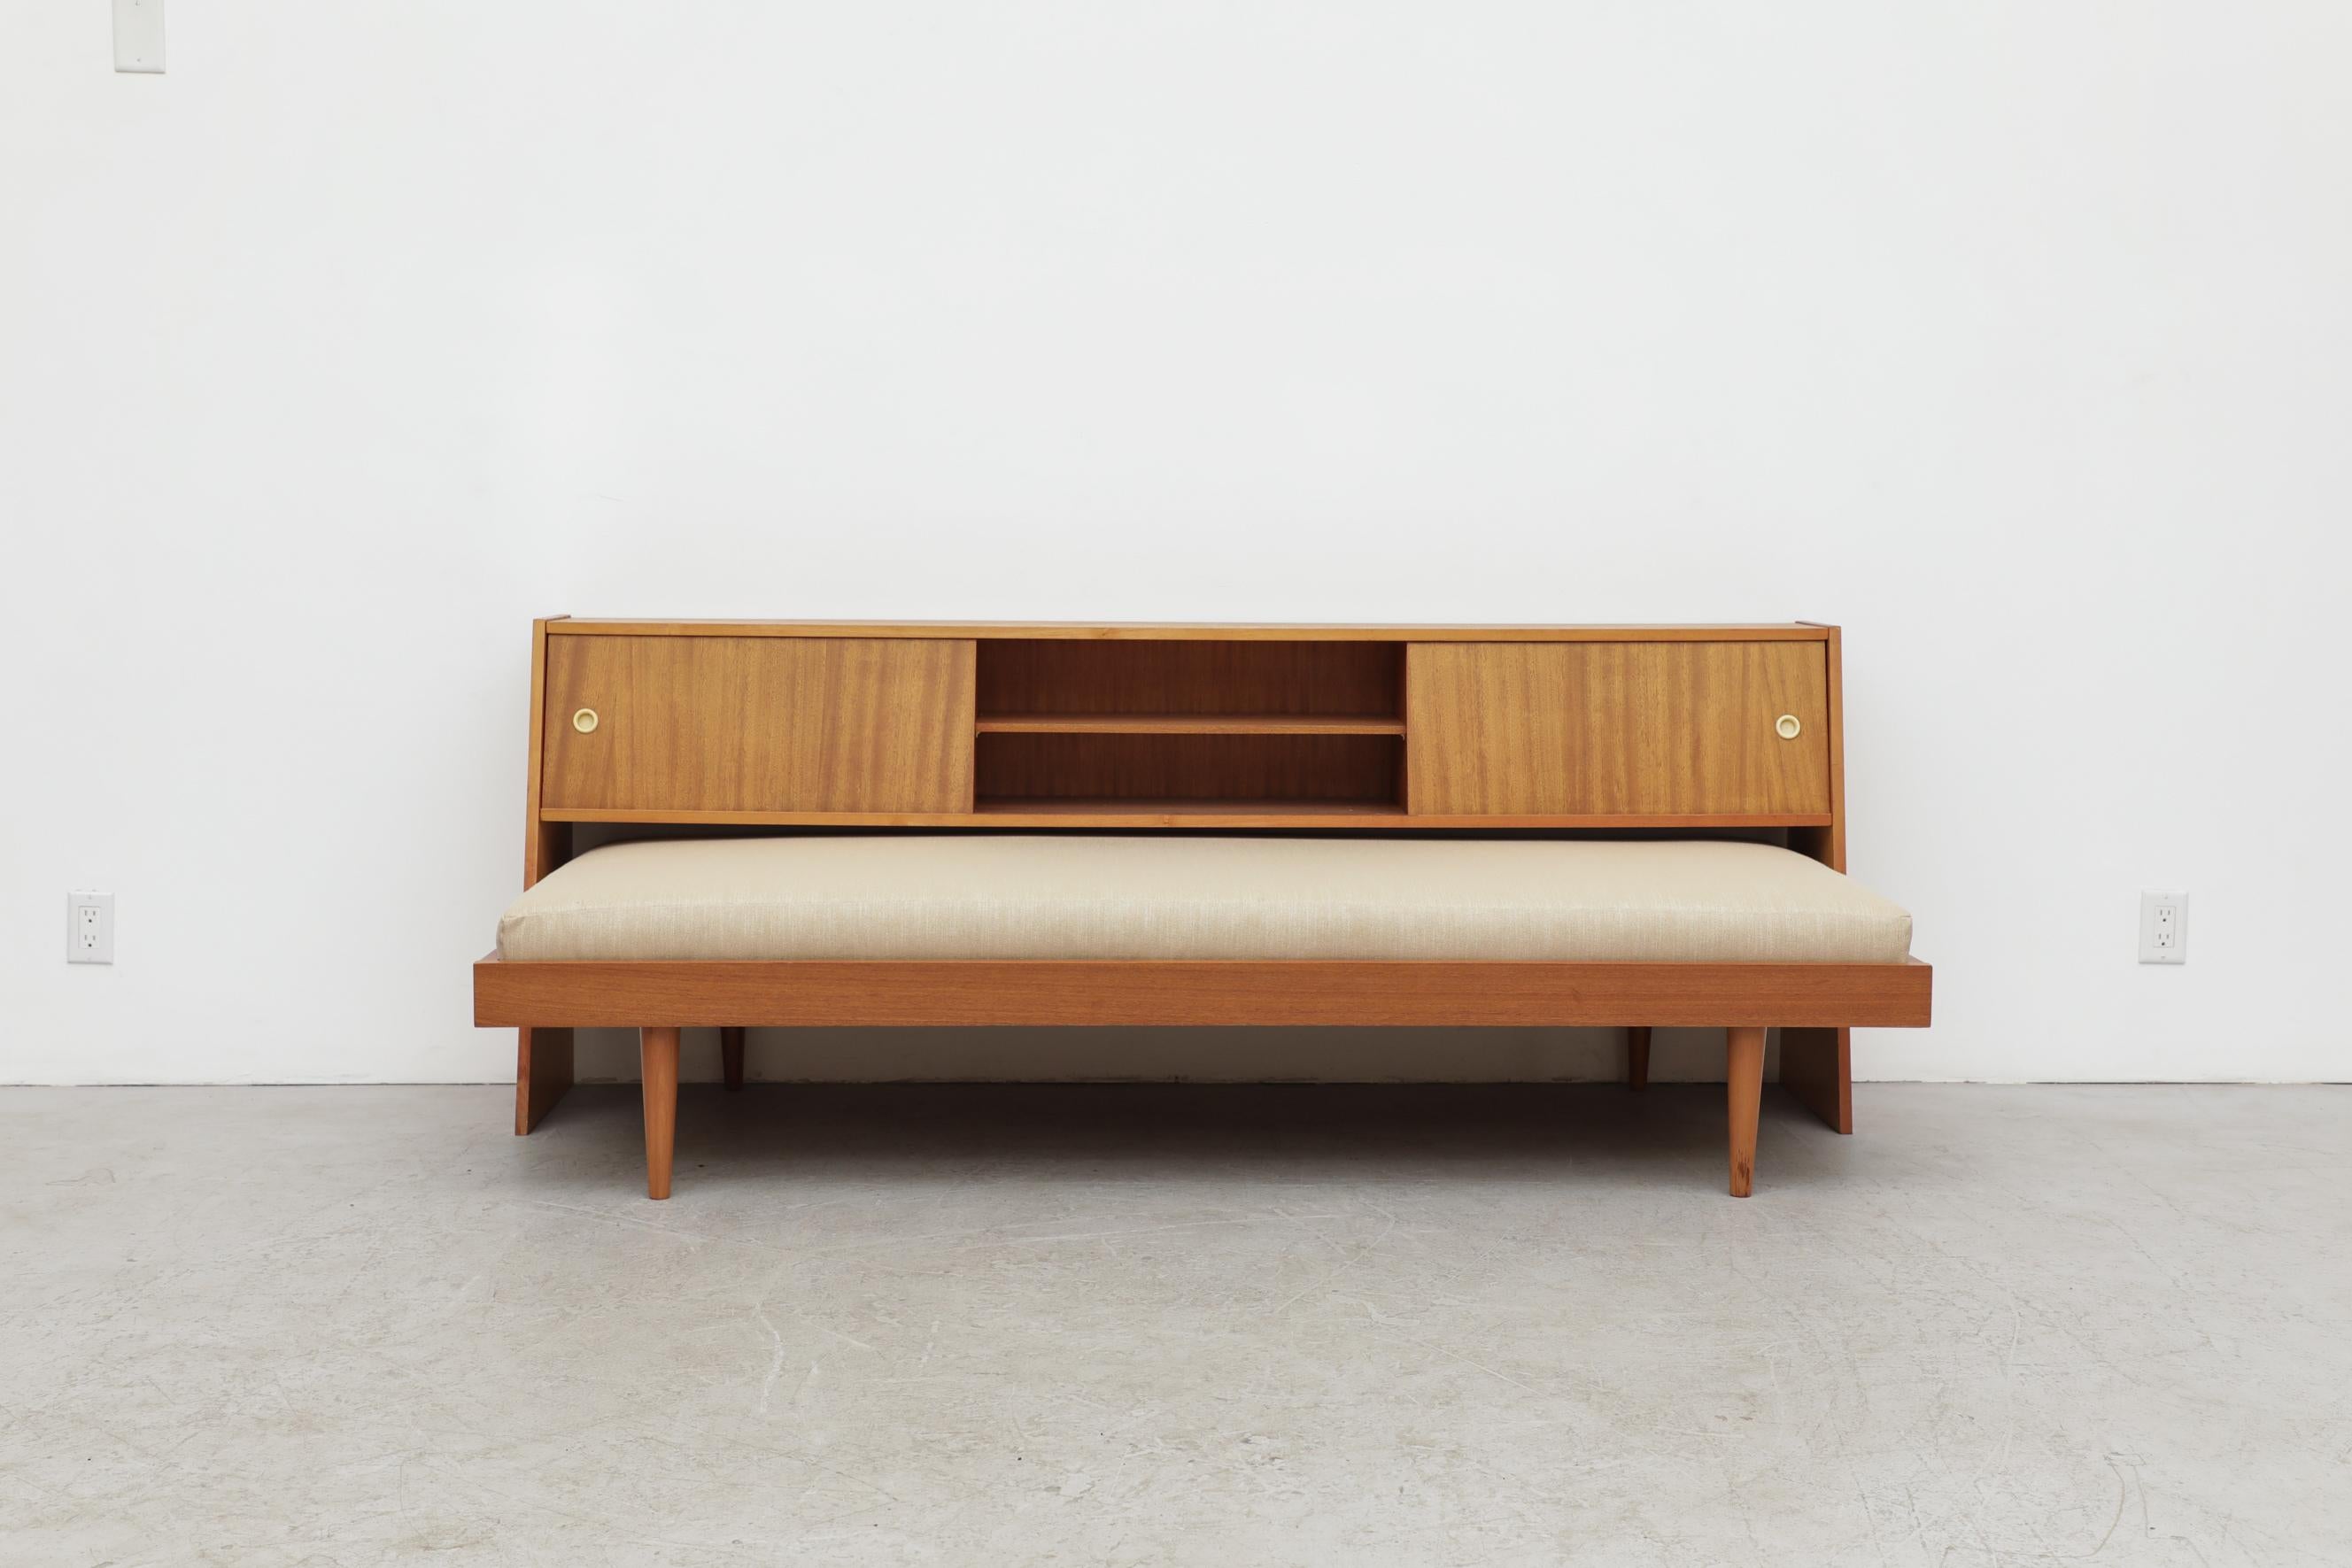 Mid-Century teak daybed and matching headboard with storage cabinets and shelves. The headboard is detached, bed can easily be pushed in as a sofa or pulled out for more space as a bed. Headboard measures 76 x 15.25/8.625 x 29.625